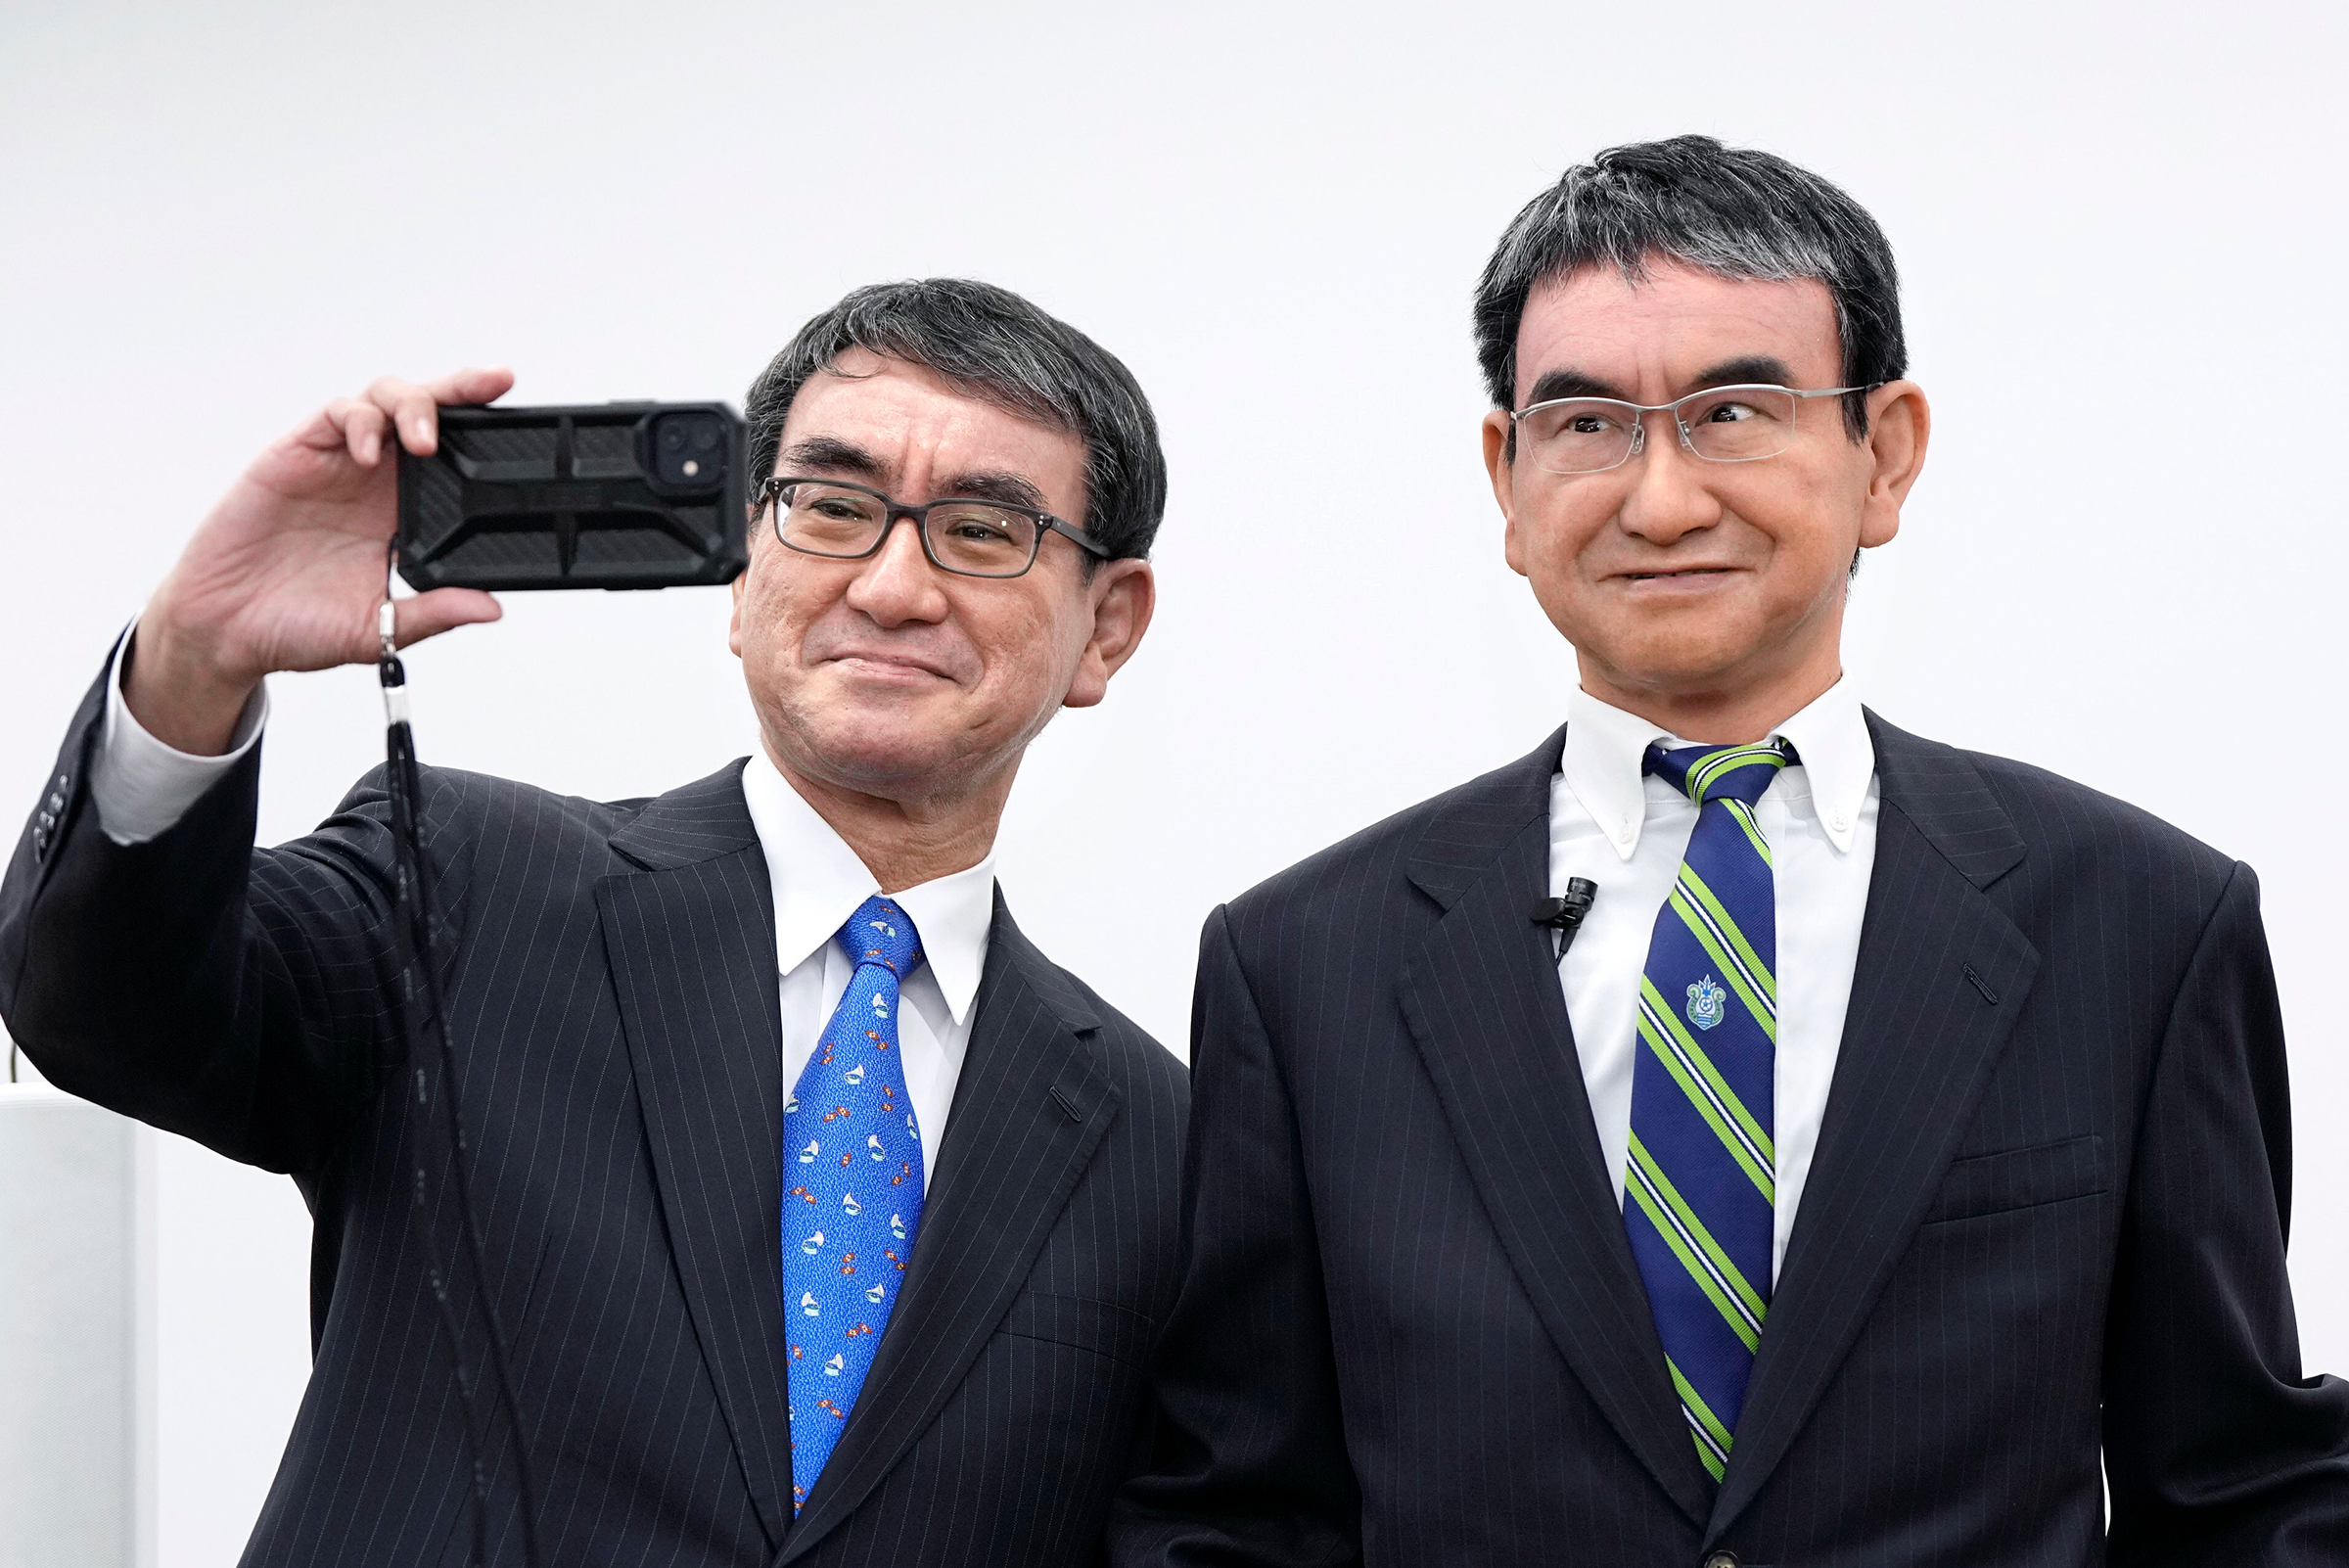 Japanese Digital Minister Taro Kono takes a selfie with his avatar robot in Tokyo on Oct. 21, 2022. (Kyodo News/AP)